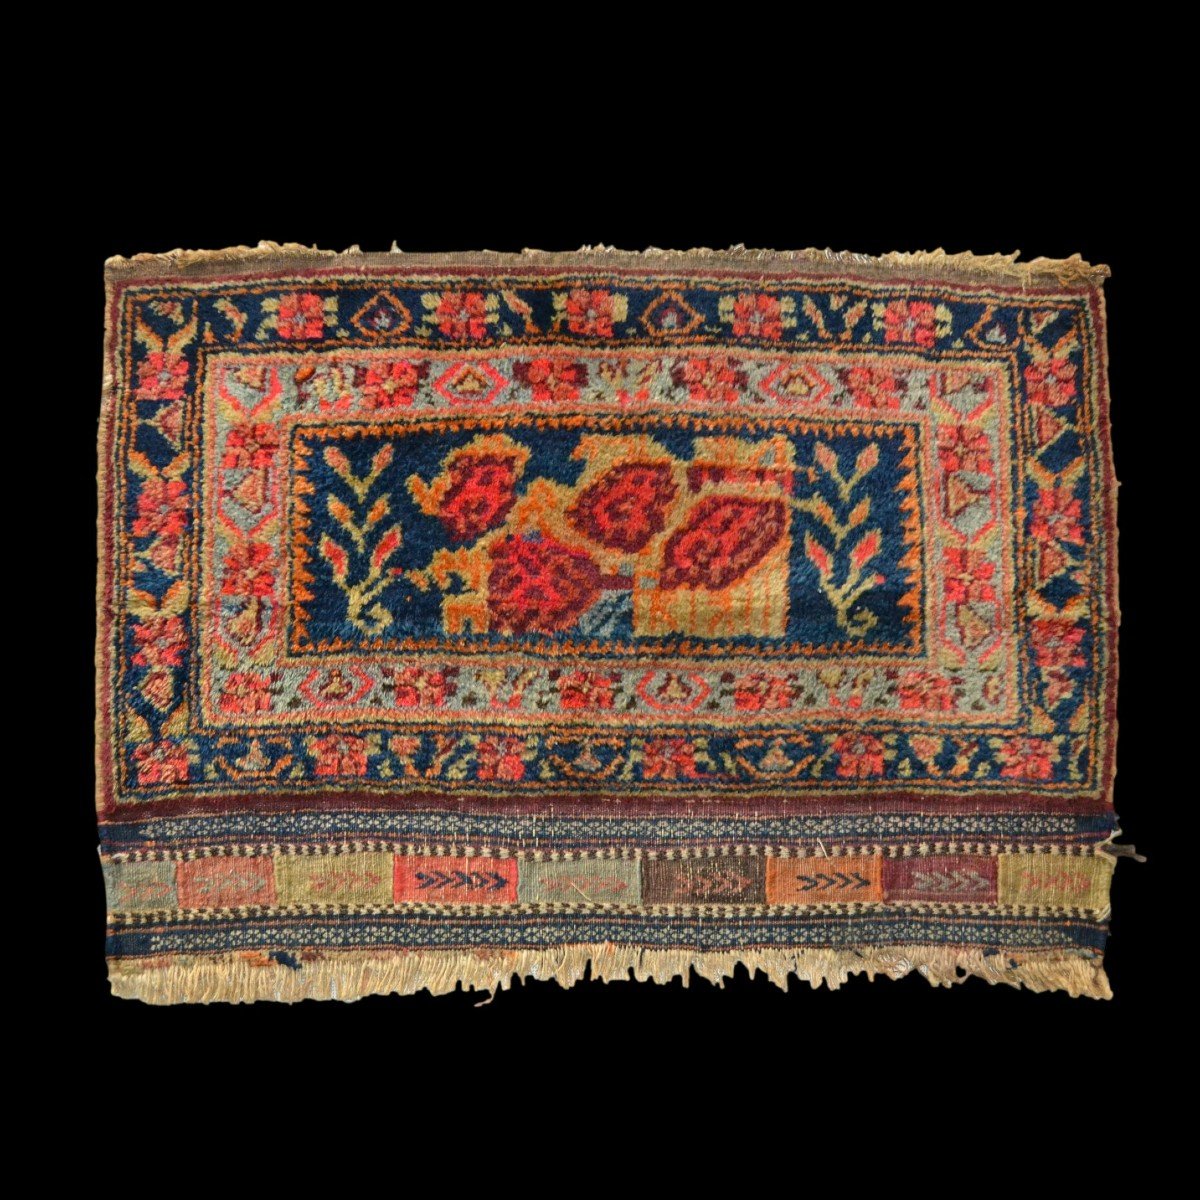 Afshar With Floral Decoration, 52 Cm X 74 Cm, Small Quality Carpet, 19th Century Artifact, Persia, Iran